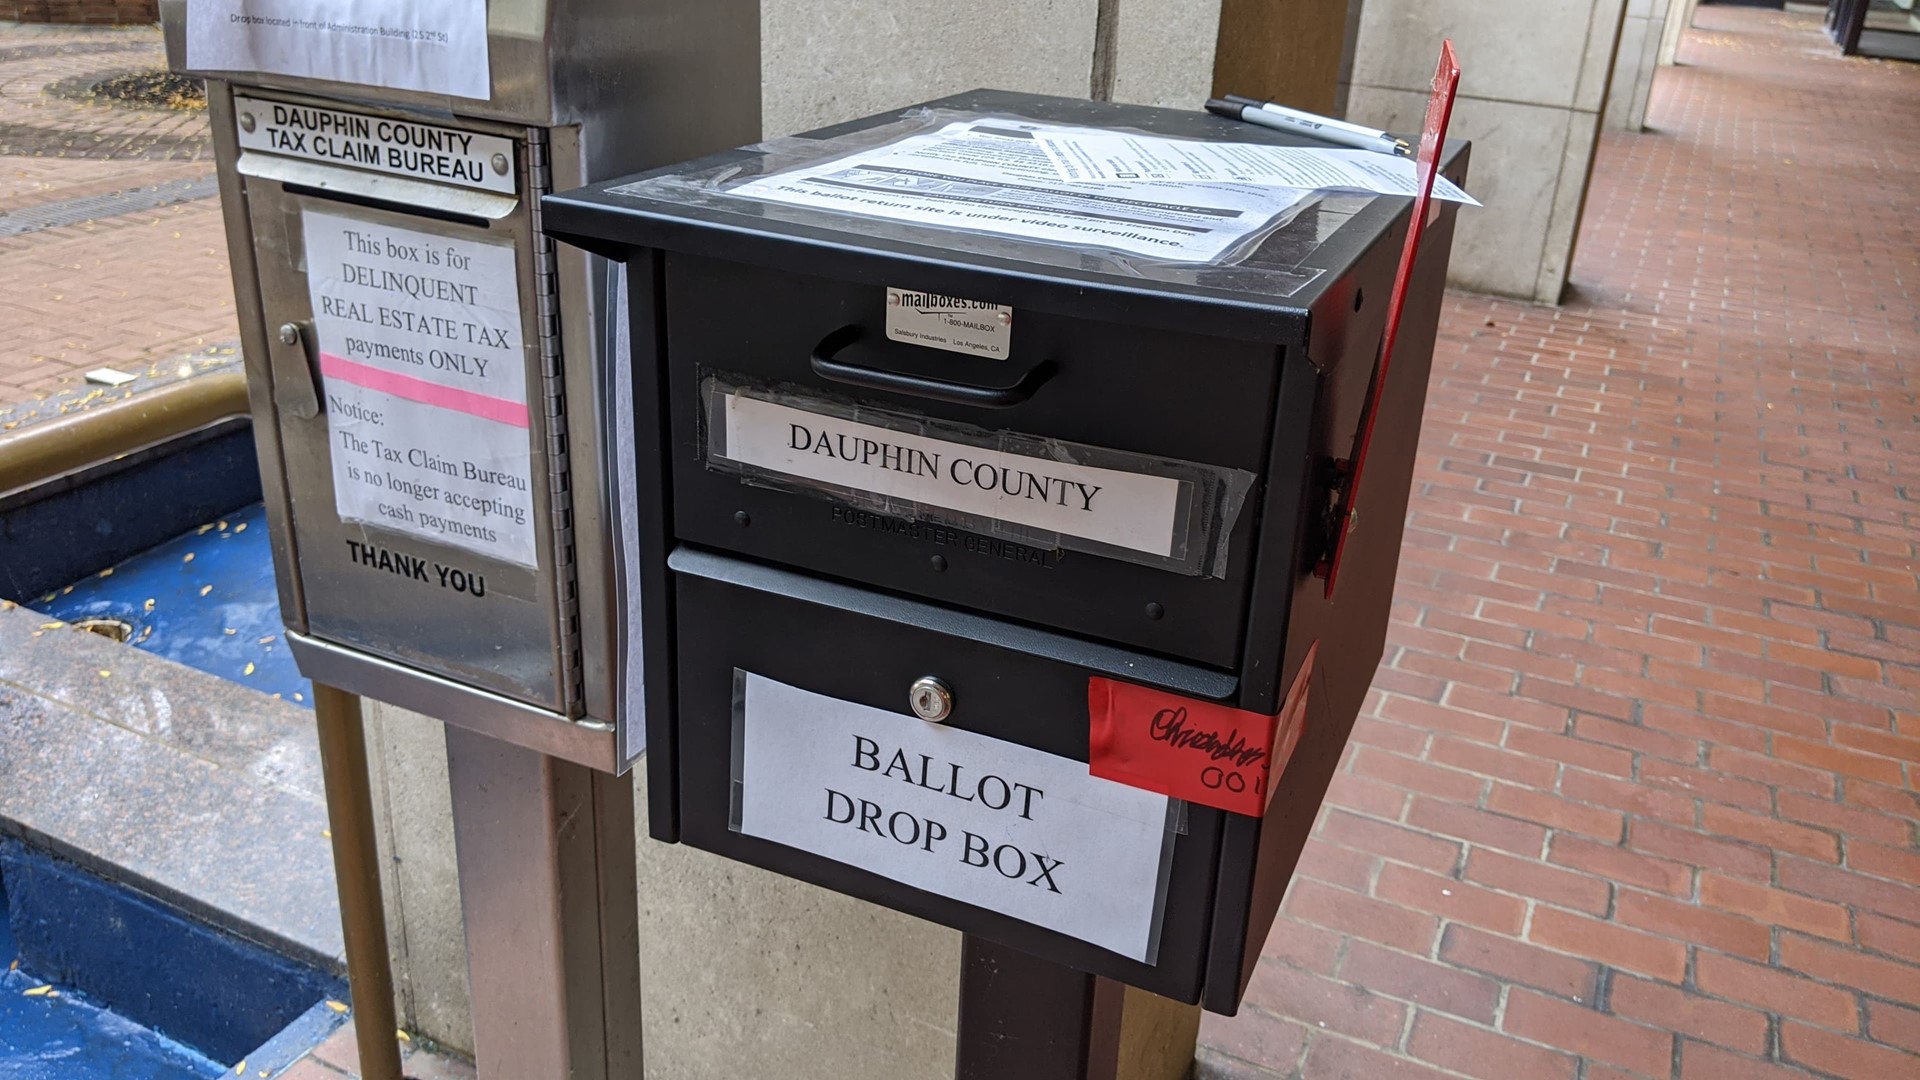 A Lancaster County judge has restored the drop box until the time of another hearing, at which point it would be determined whether a violation occurred.